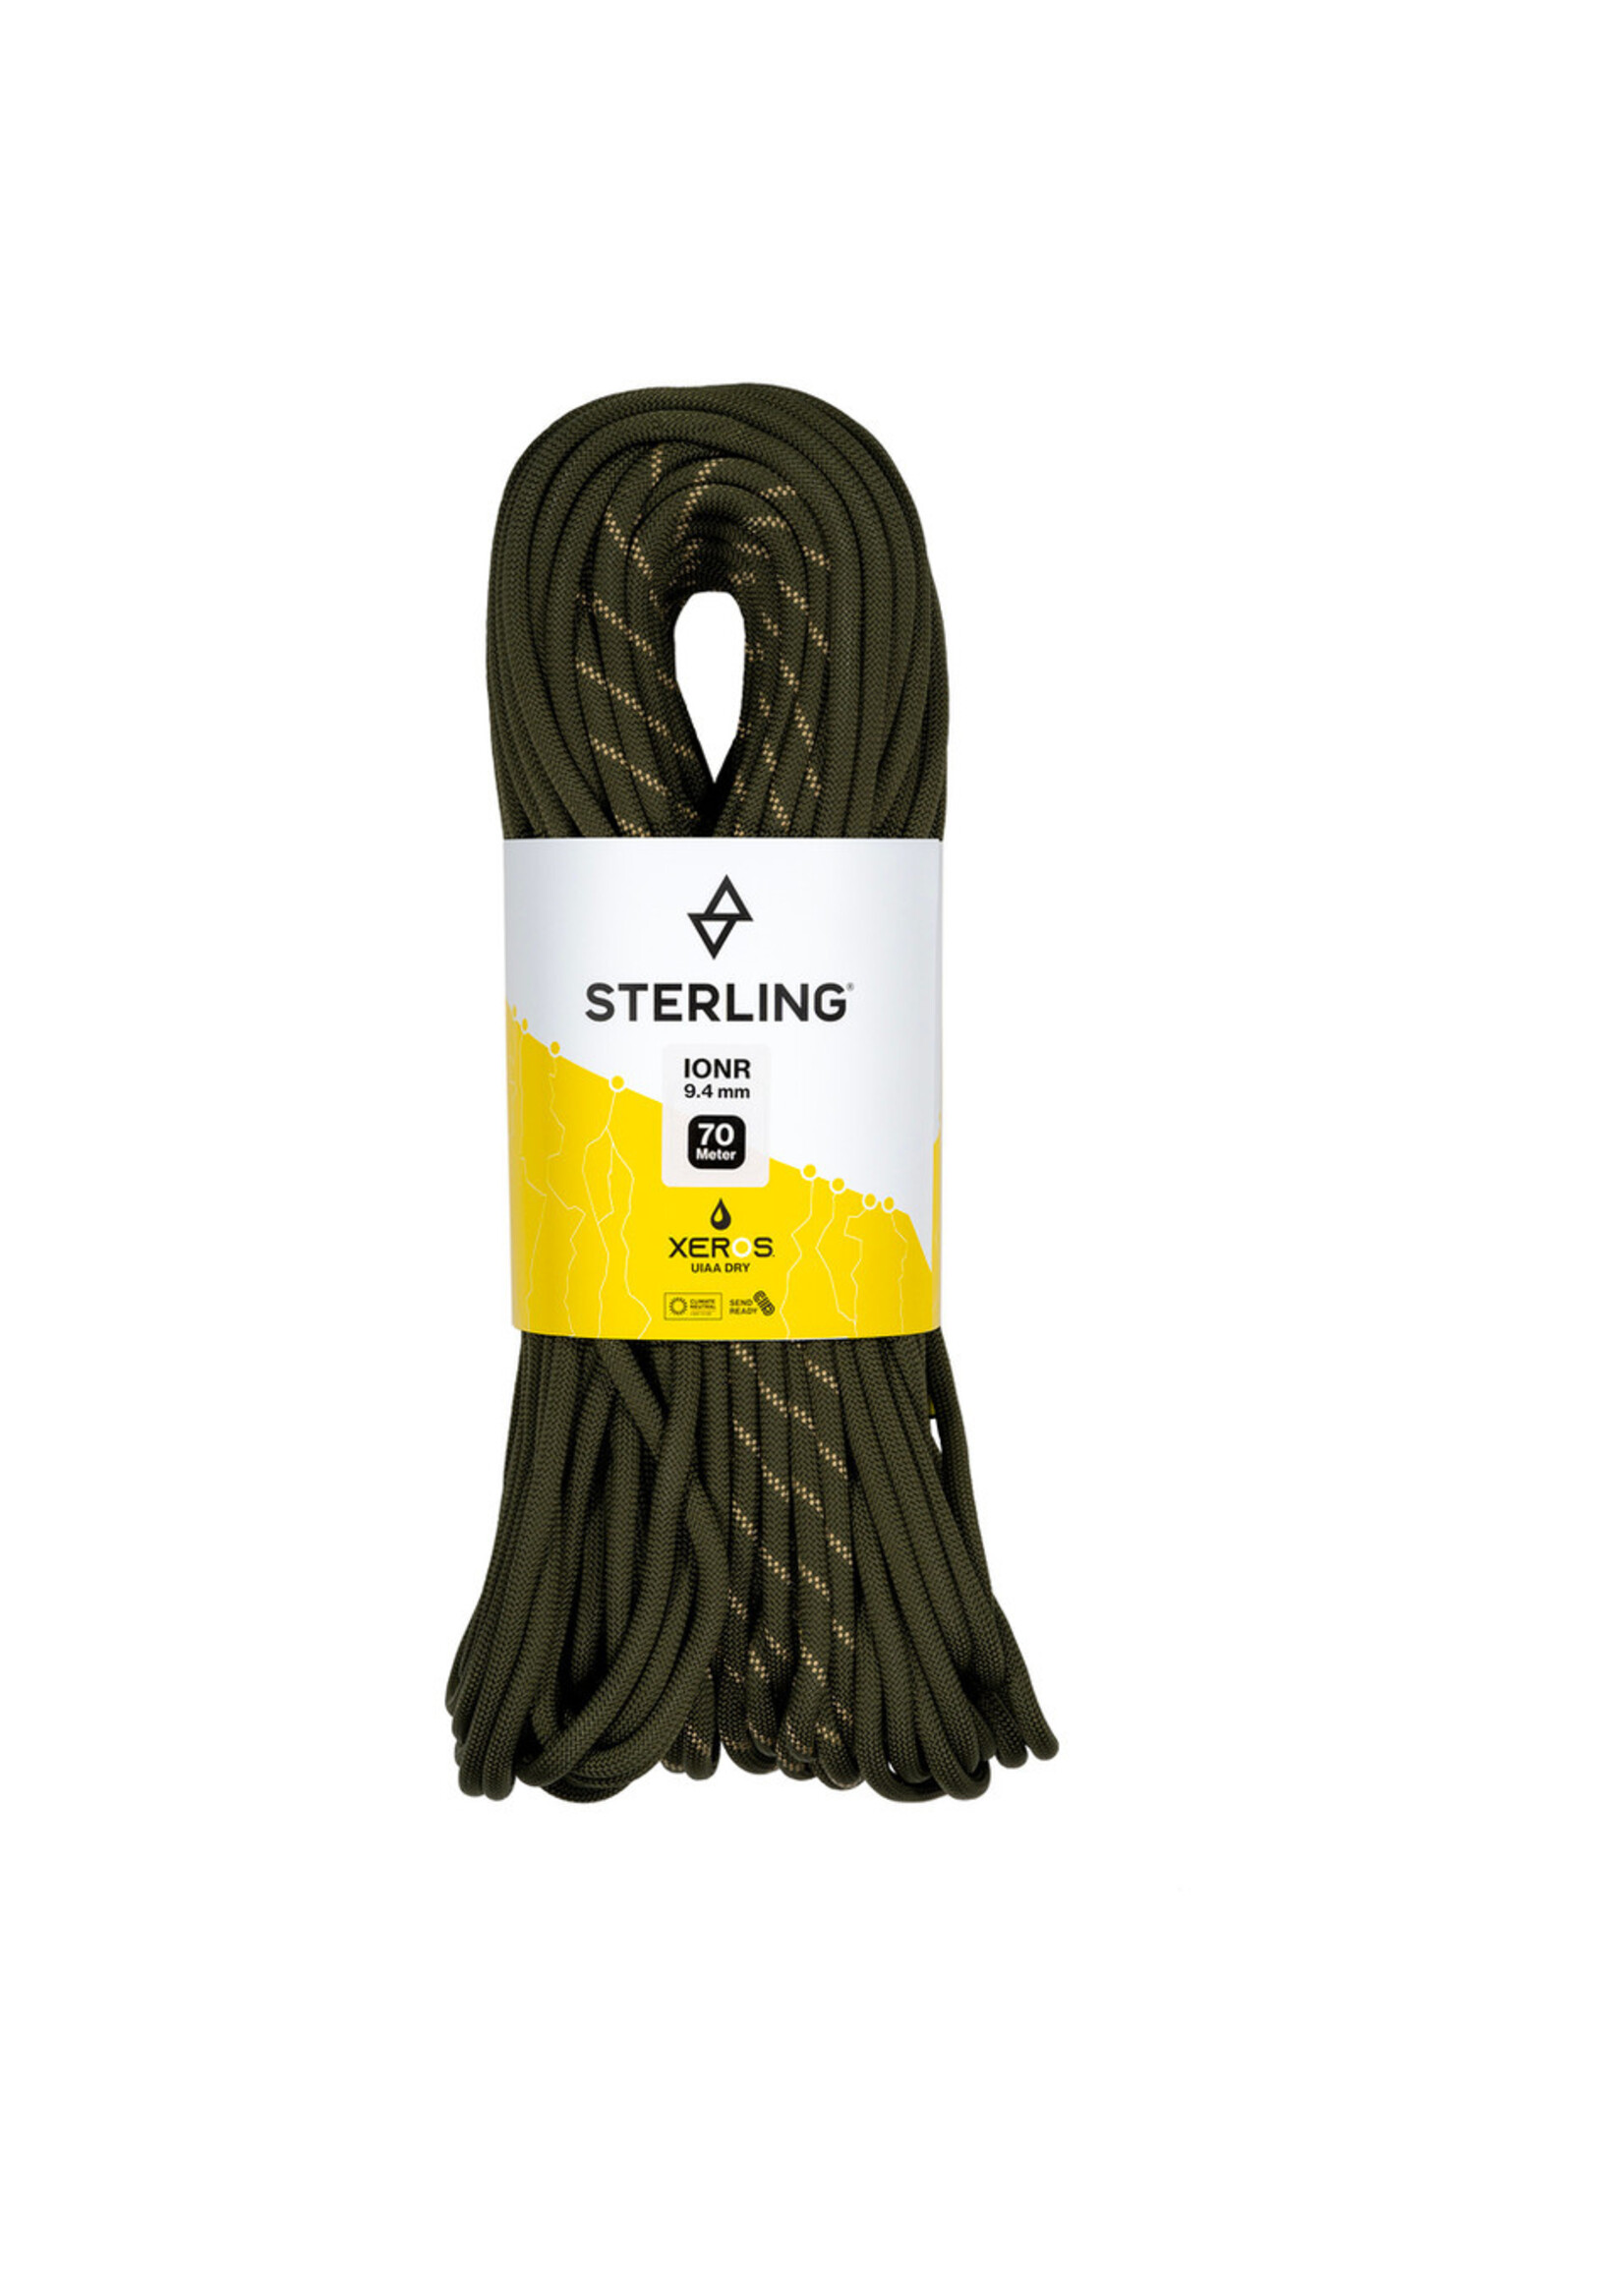 Corde d'escalade Sterling Ion R 9.4 Xeros Dry